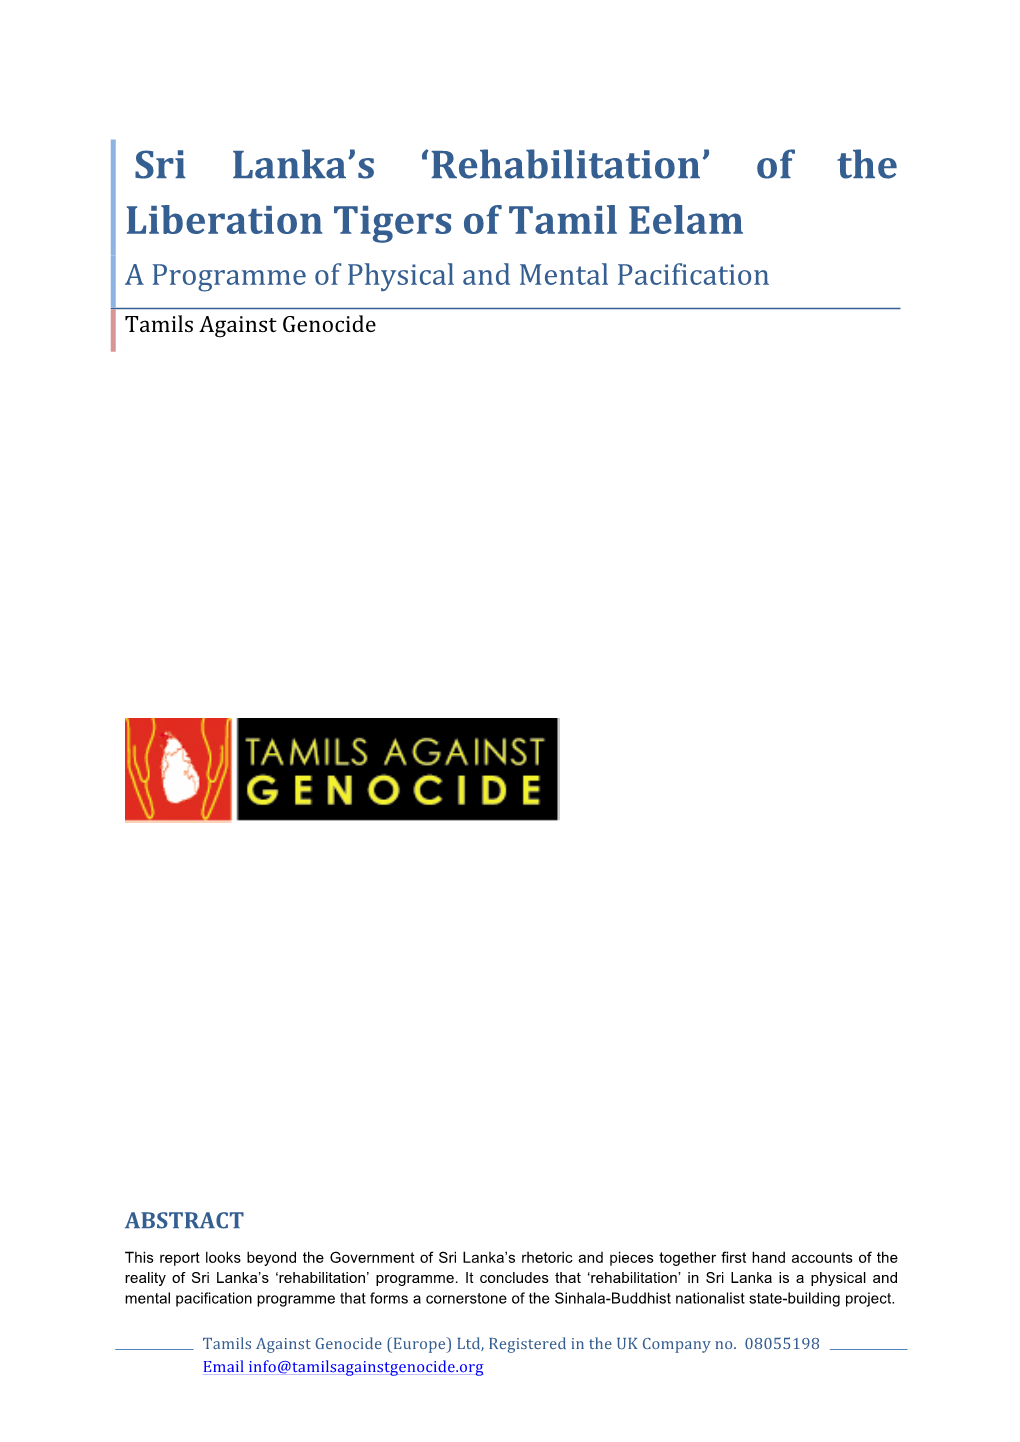 'Rehabilitation' of the Liberation Tigers of Tamil Eelam